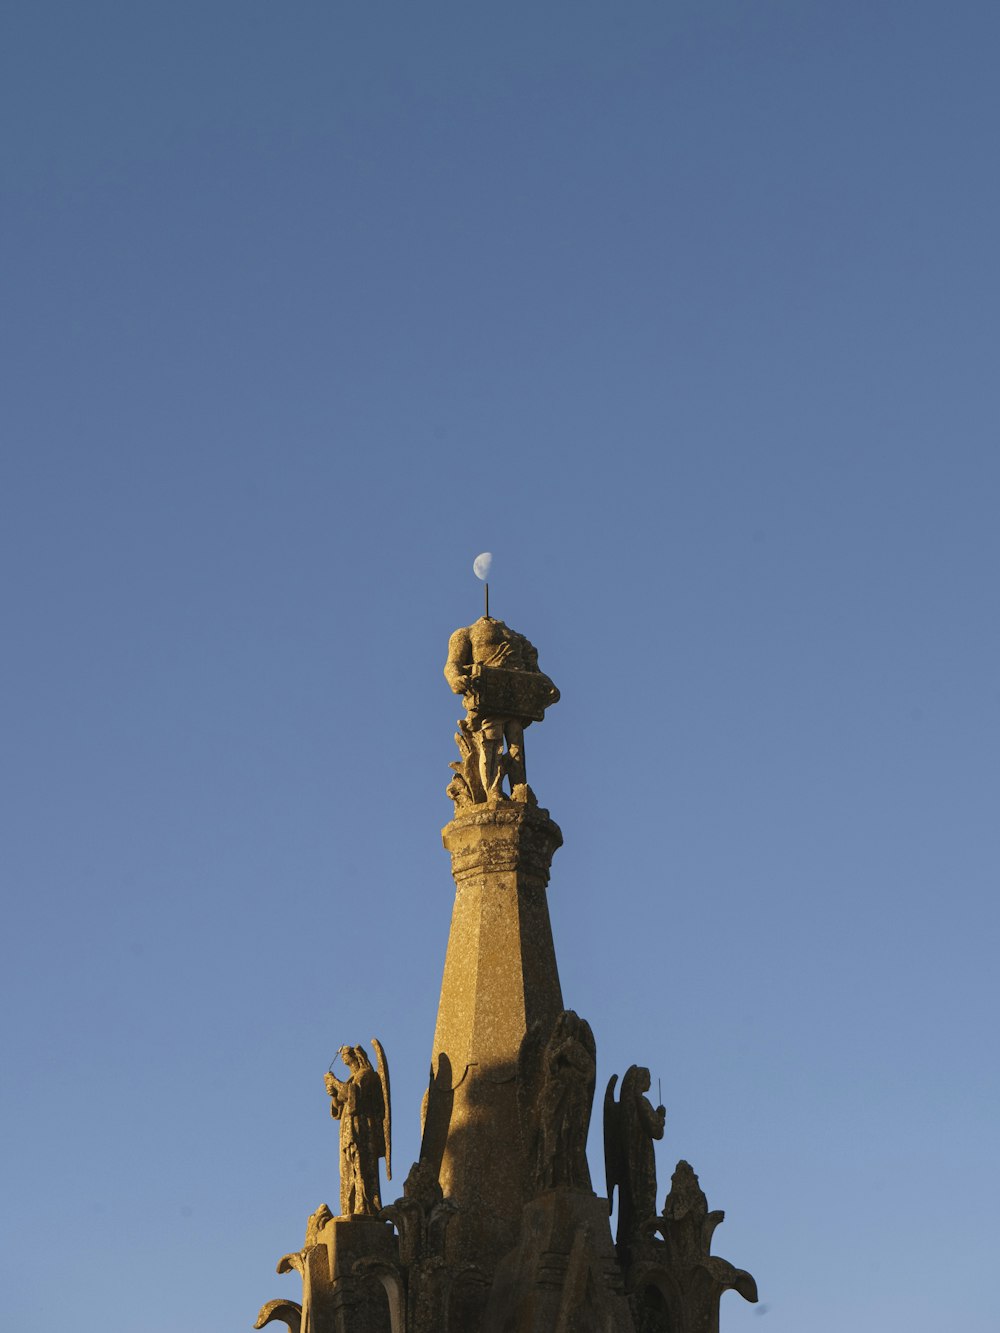 a tall tower with statues on top of it